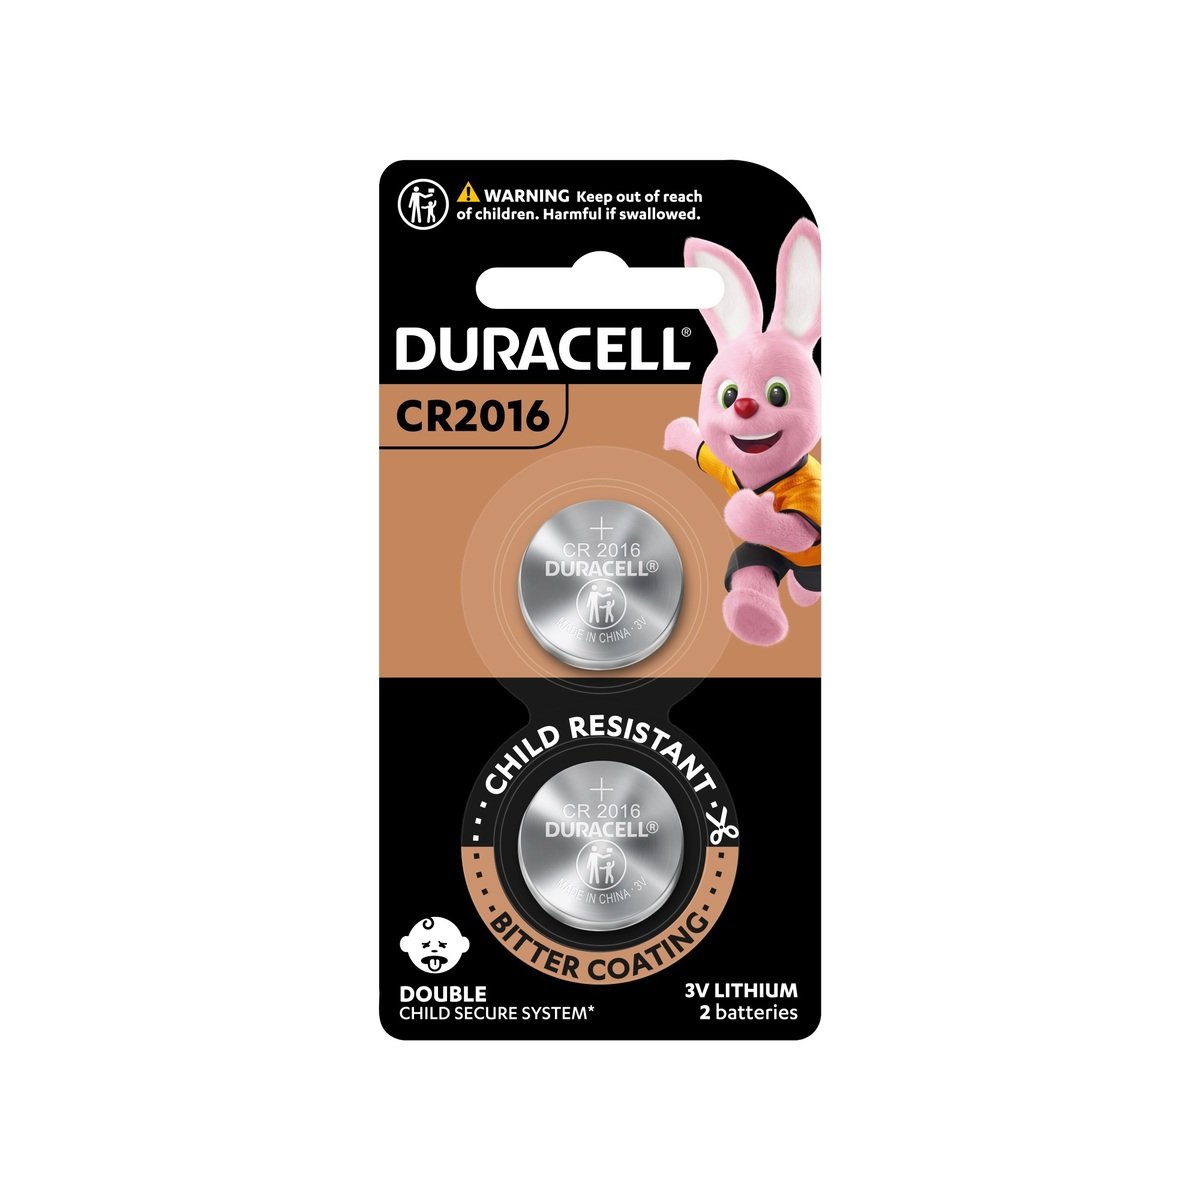 Duracell Specialty 2016 Lithium Coin Battery 3V, pack of 2 DL2016 CR2016 suitable for use in keyfobs, scales, wearables and medical devices